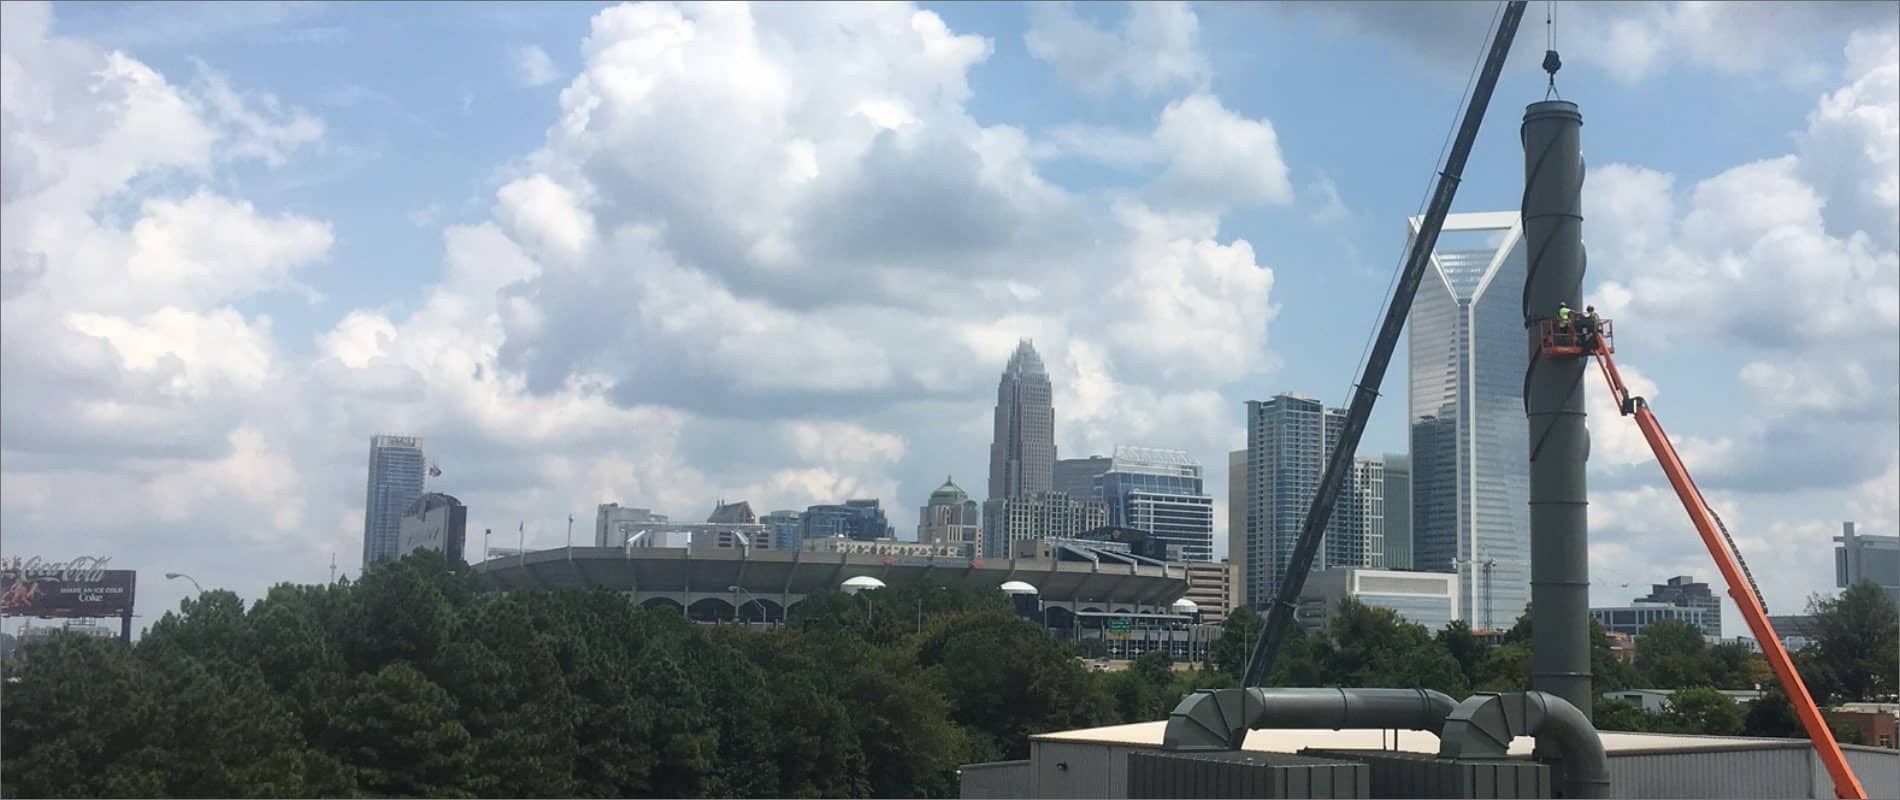 Installing a stack with Charlotte, NC, skyline in background